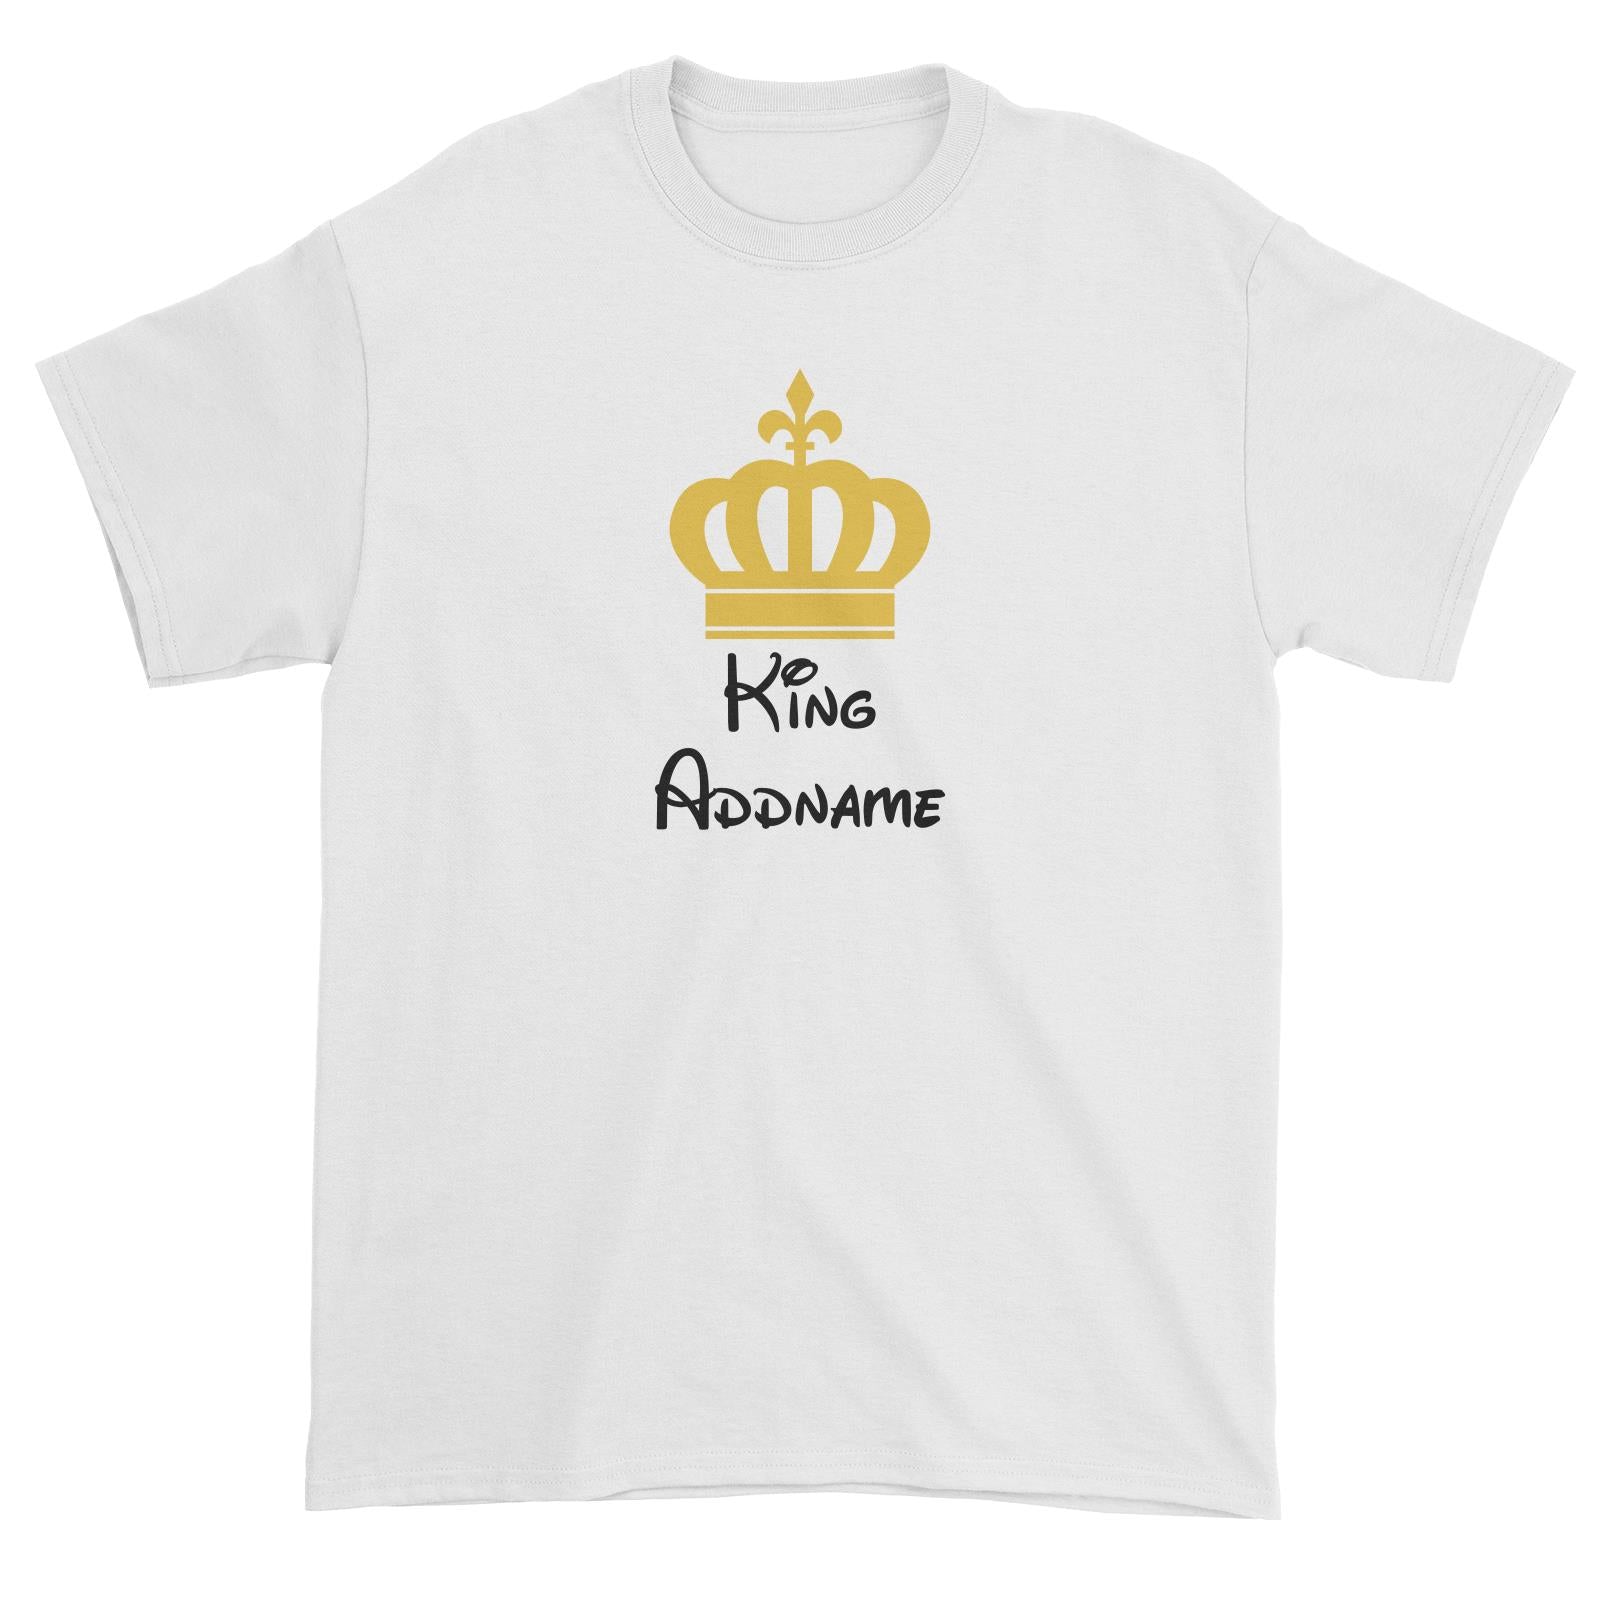 Royal King with Crown Addname Unisex T-Shirt